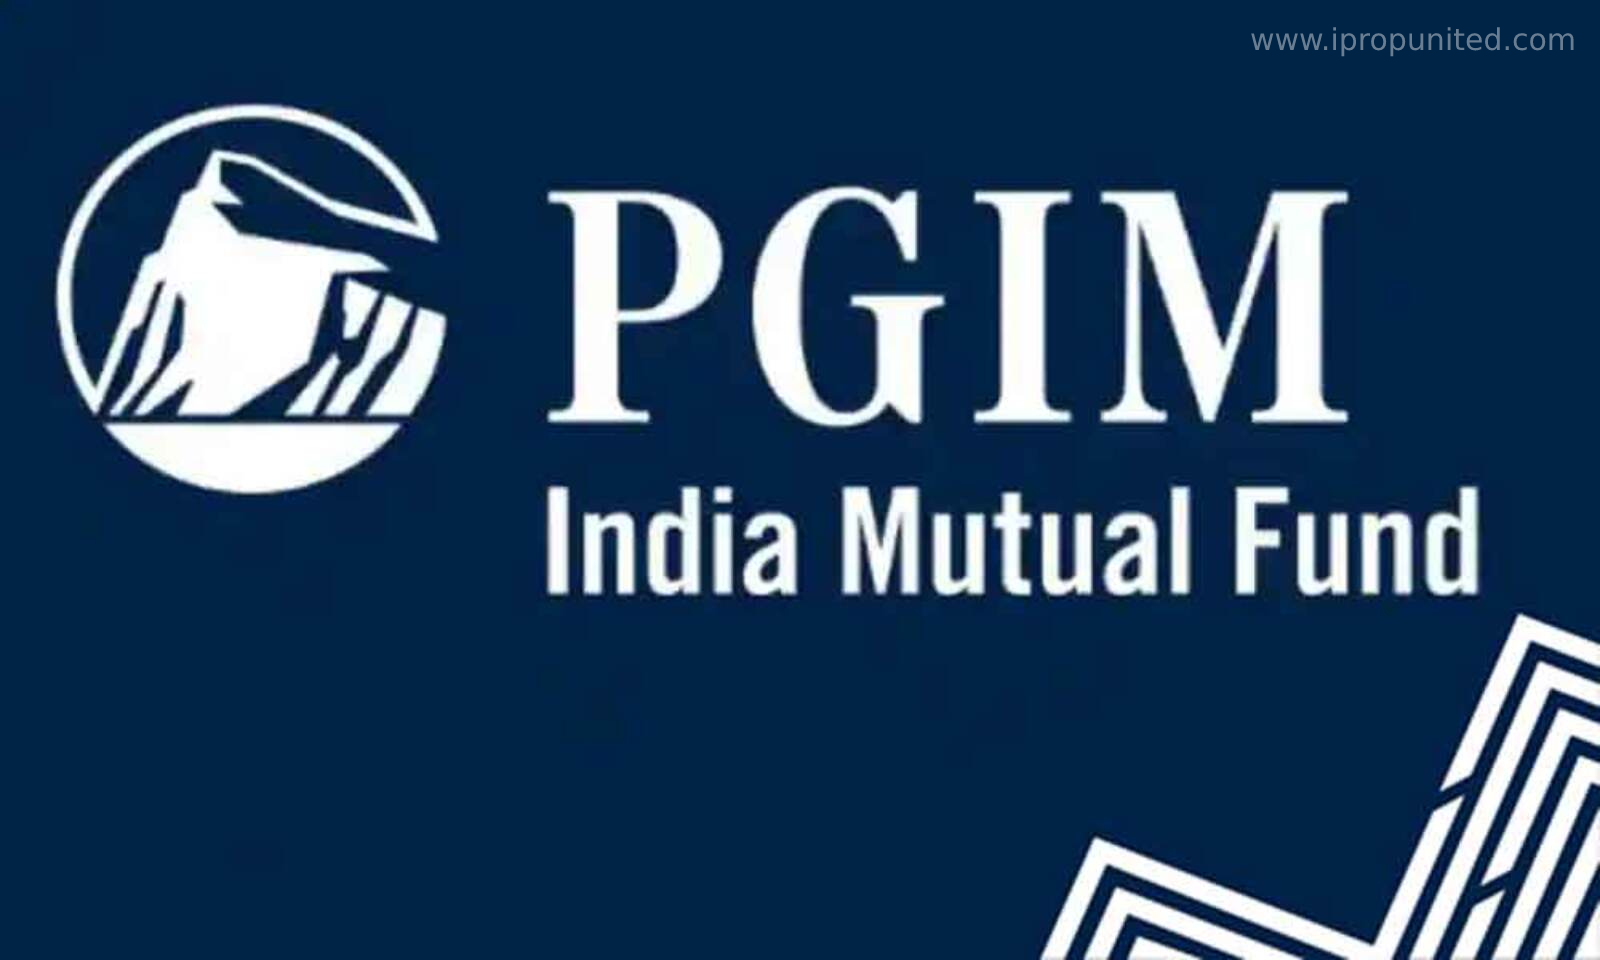 India's first Global Real Estate Securities Fund launched by PGIM India Mutual Fund